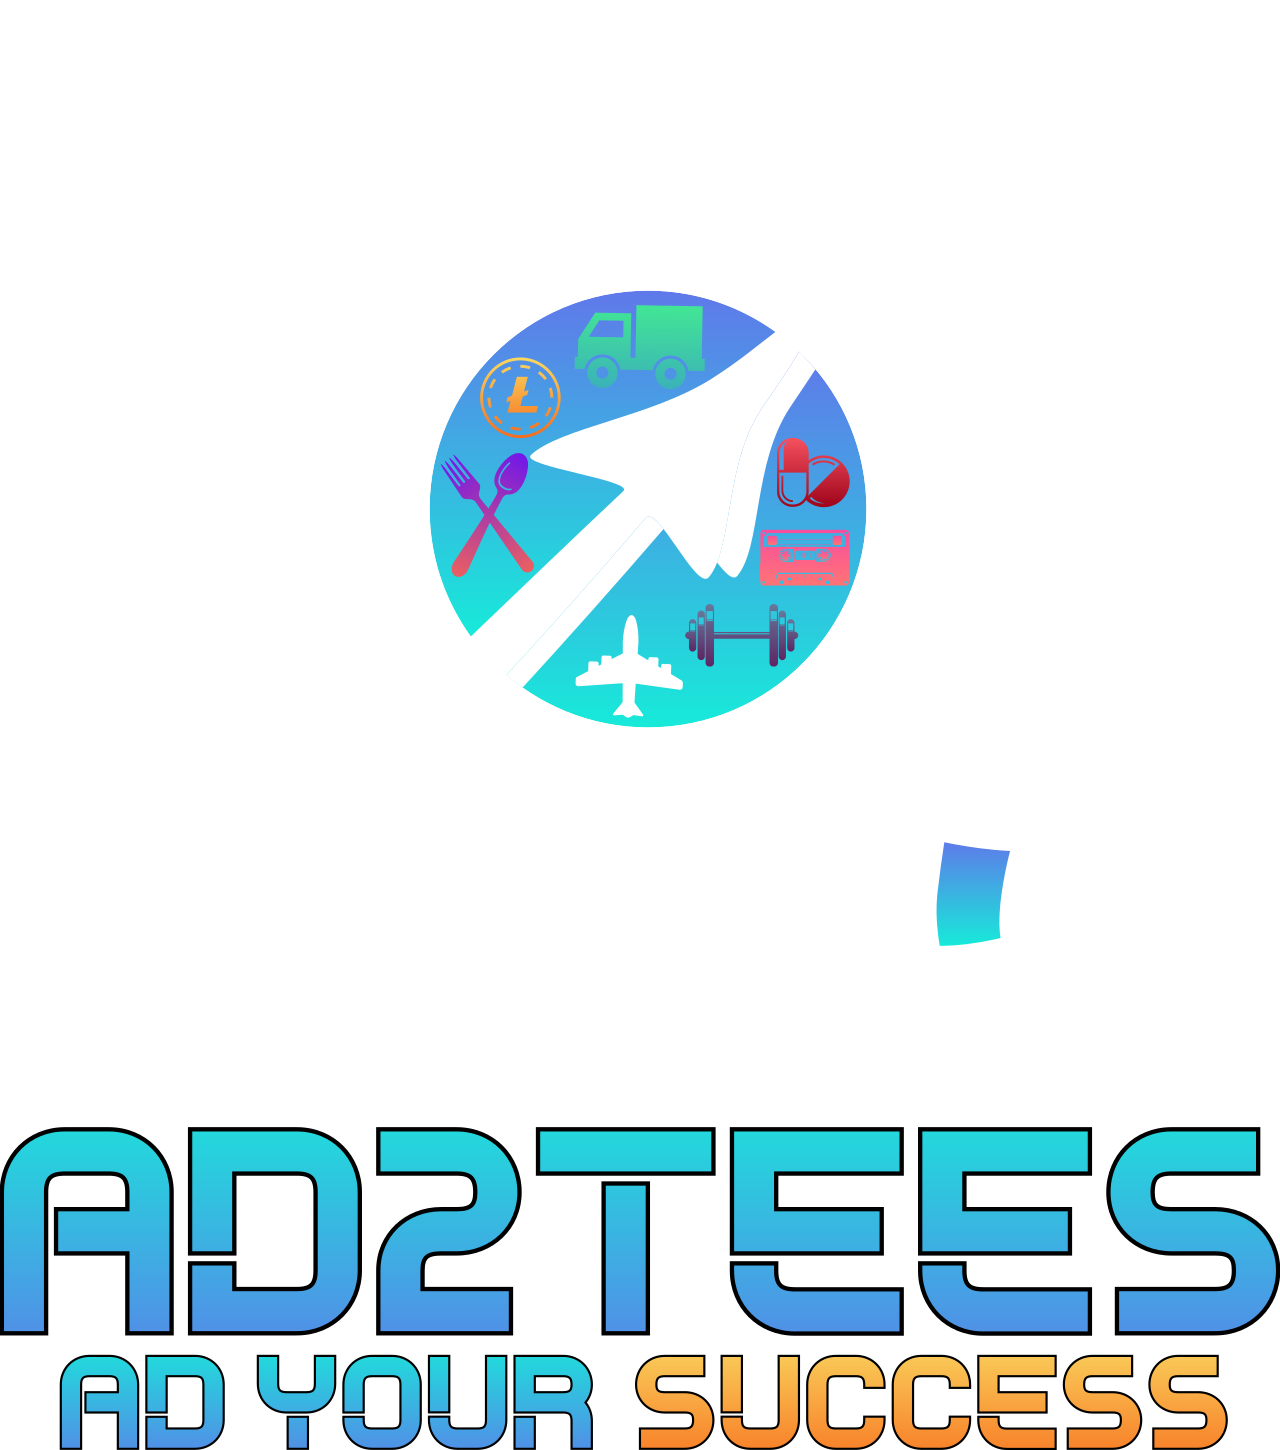 AD2TEES's web page